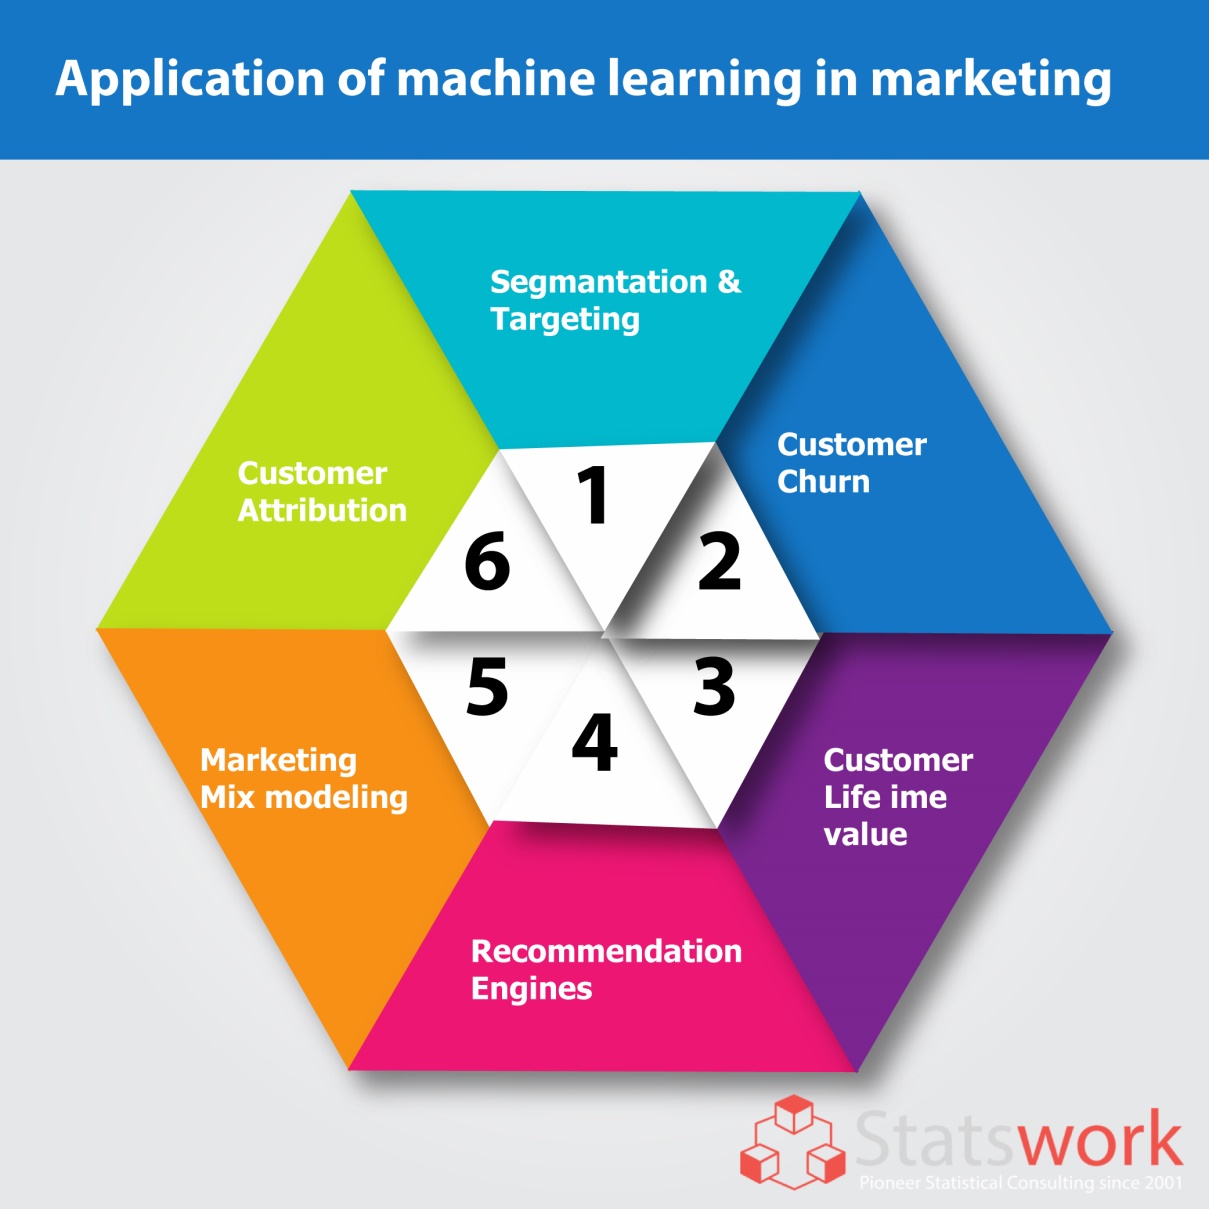 Application of machine learning in marketing